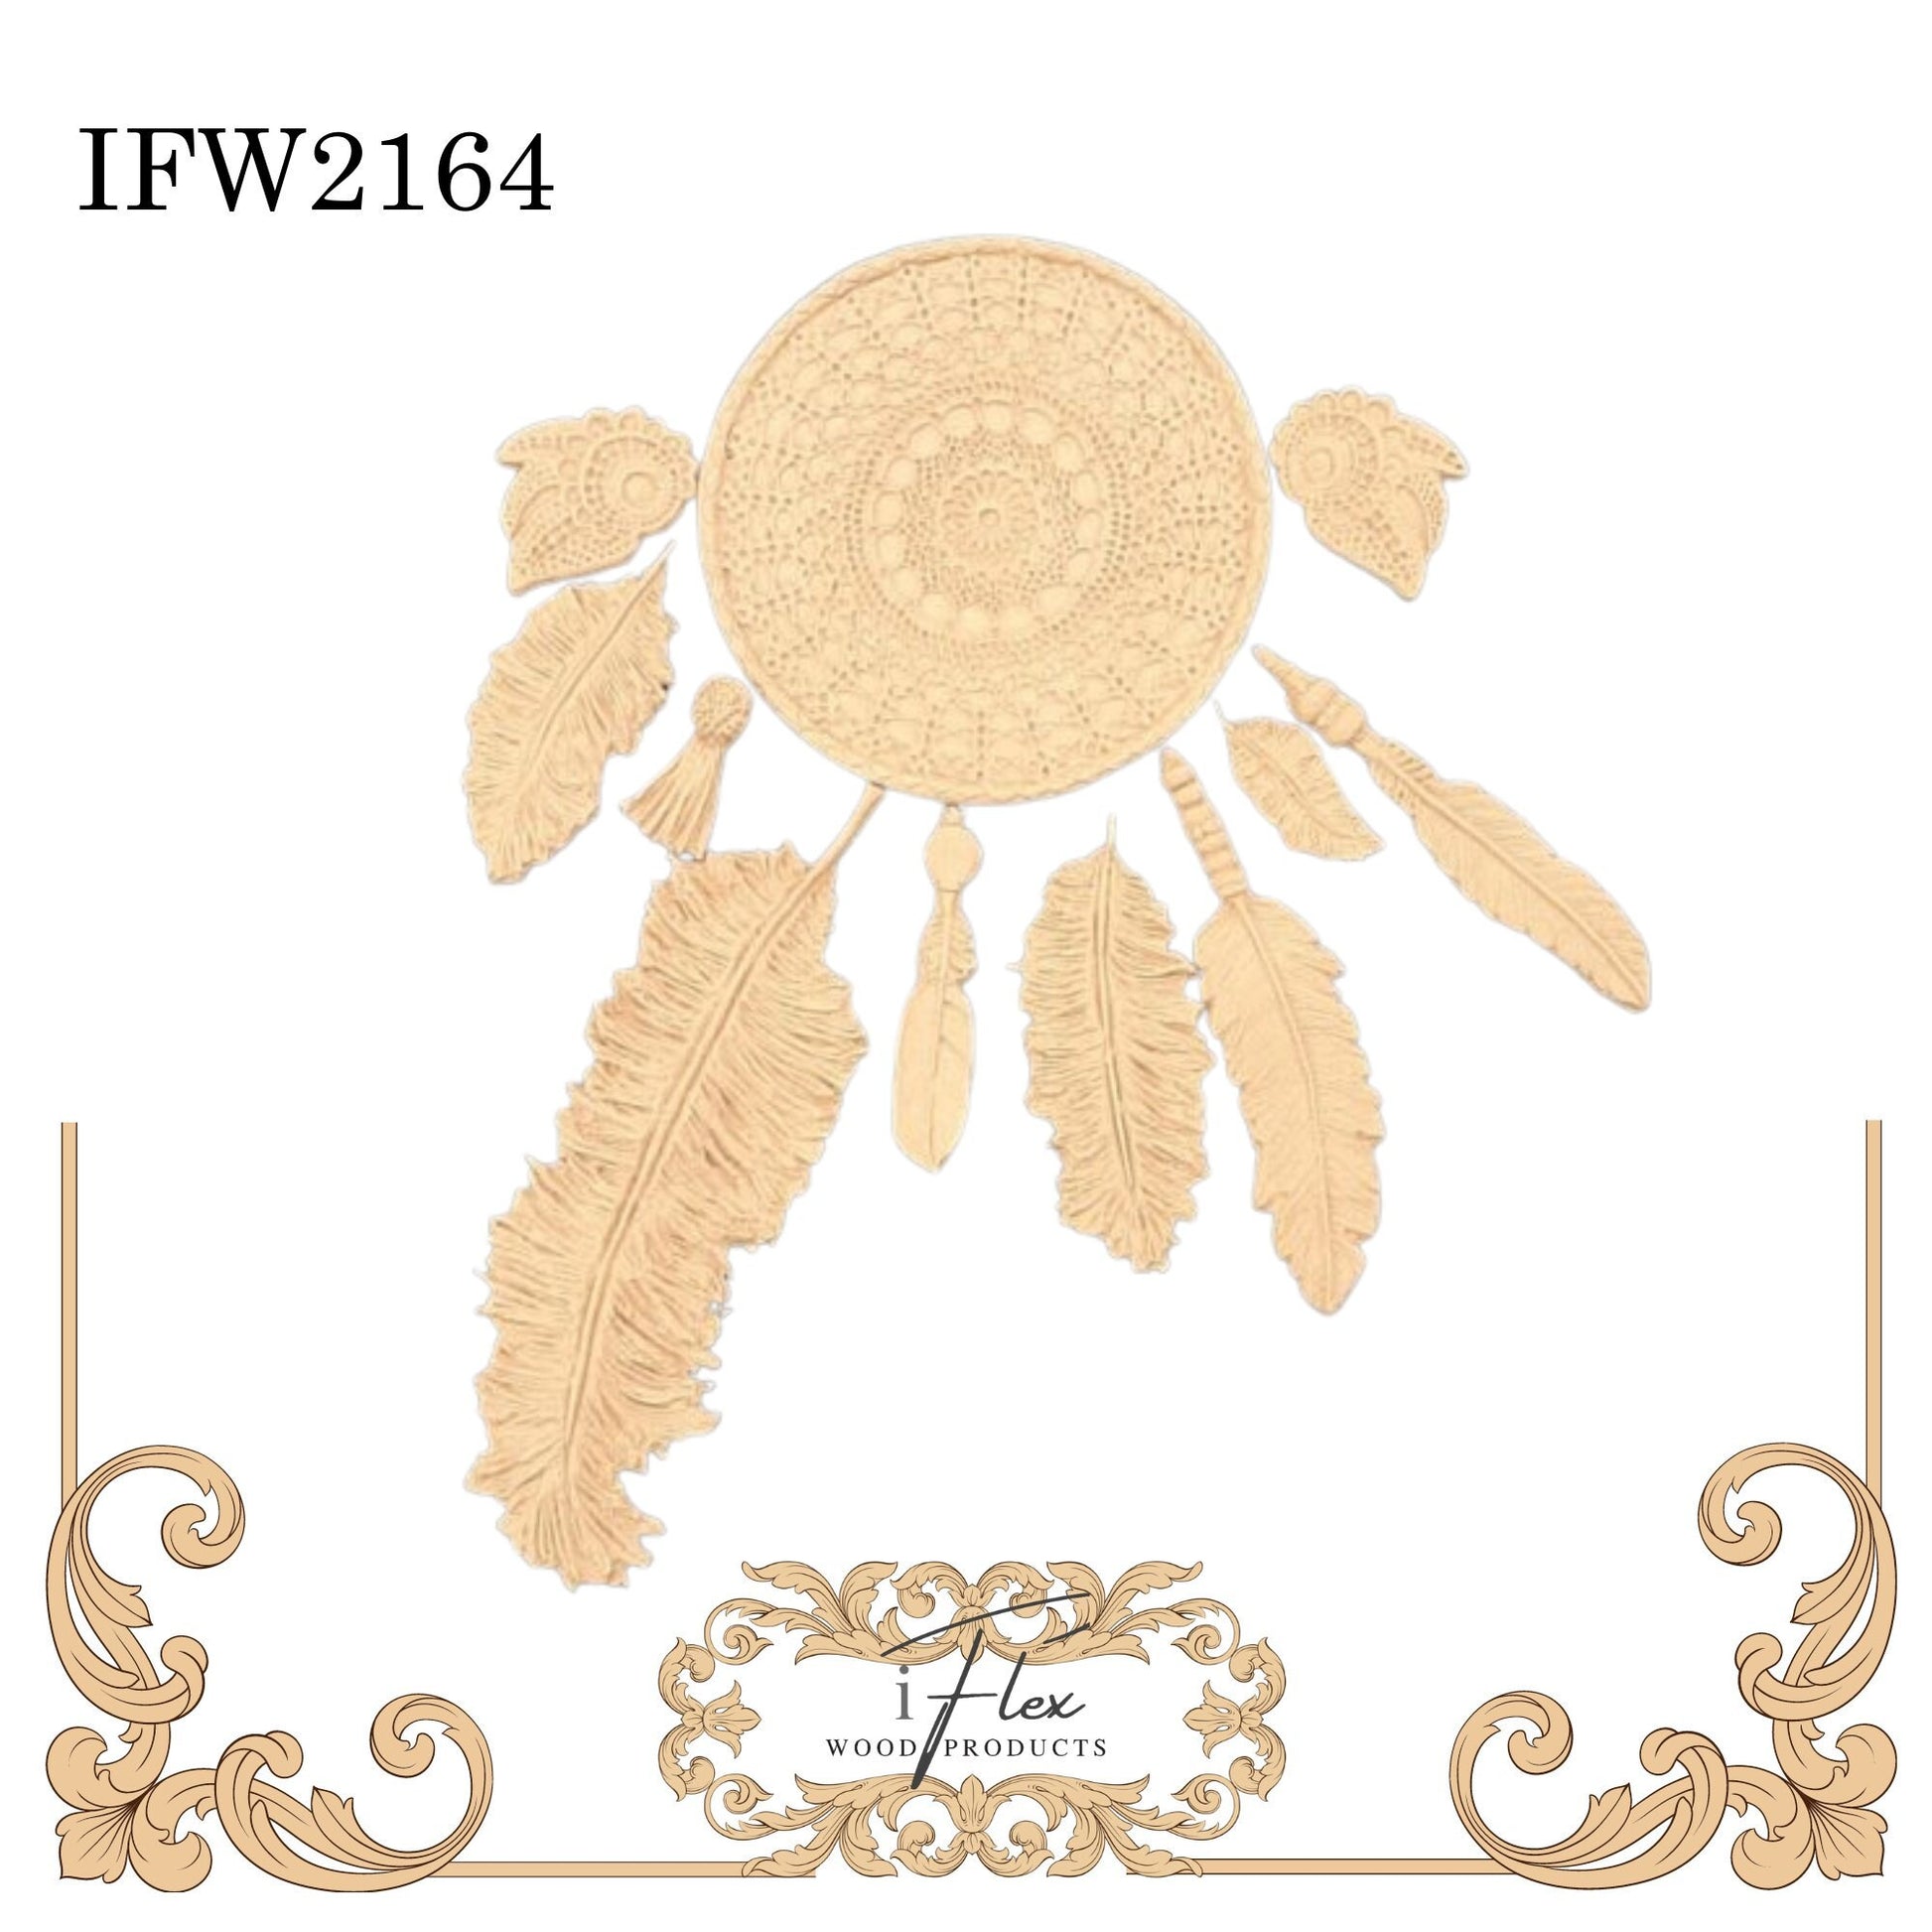 IFW 2164 iFlex Wood Products, bendable mouldings, flexible, wooden appliques, misc. Dream catcher